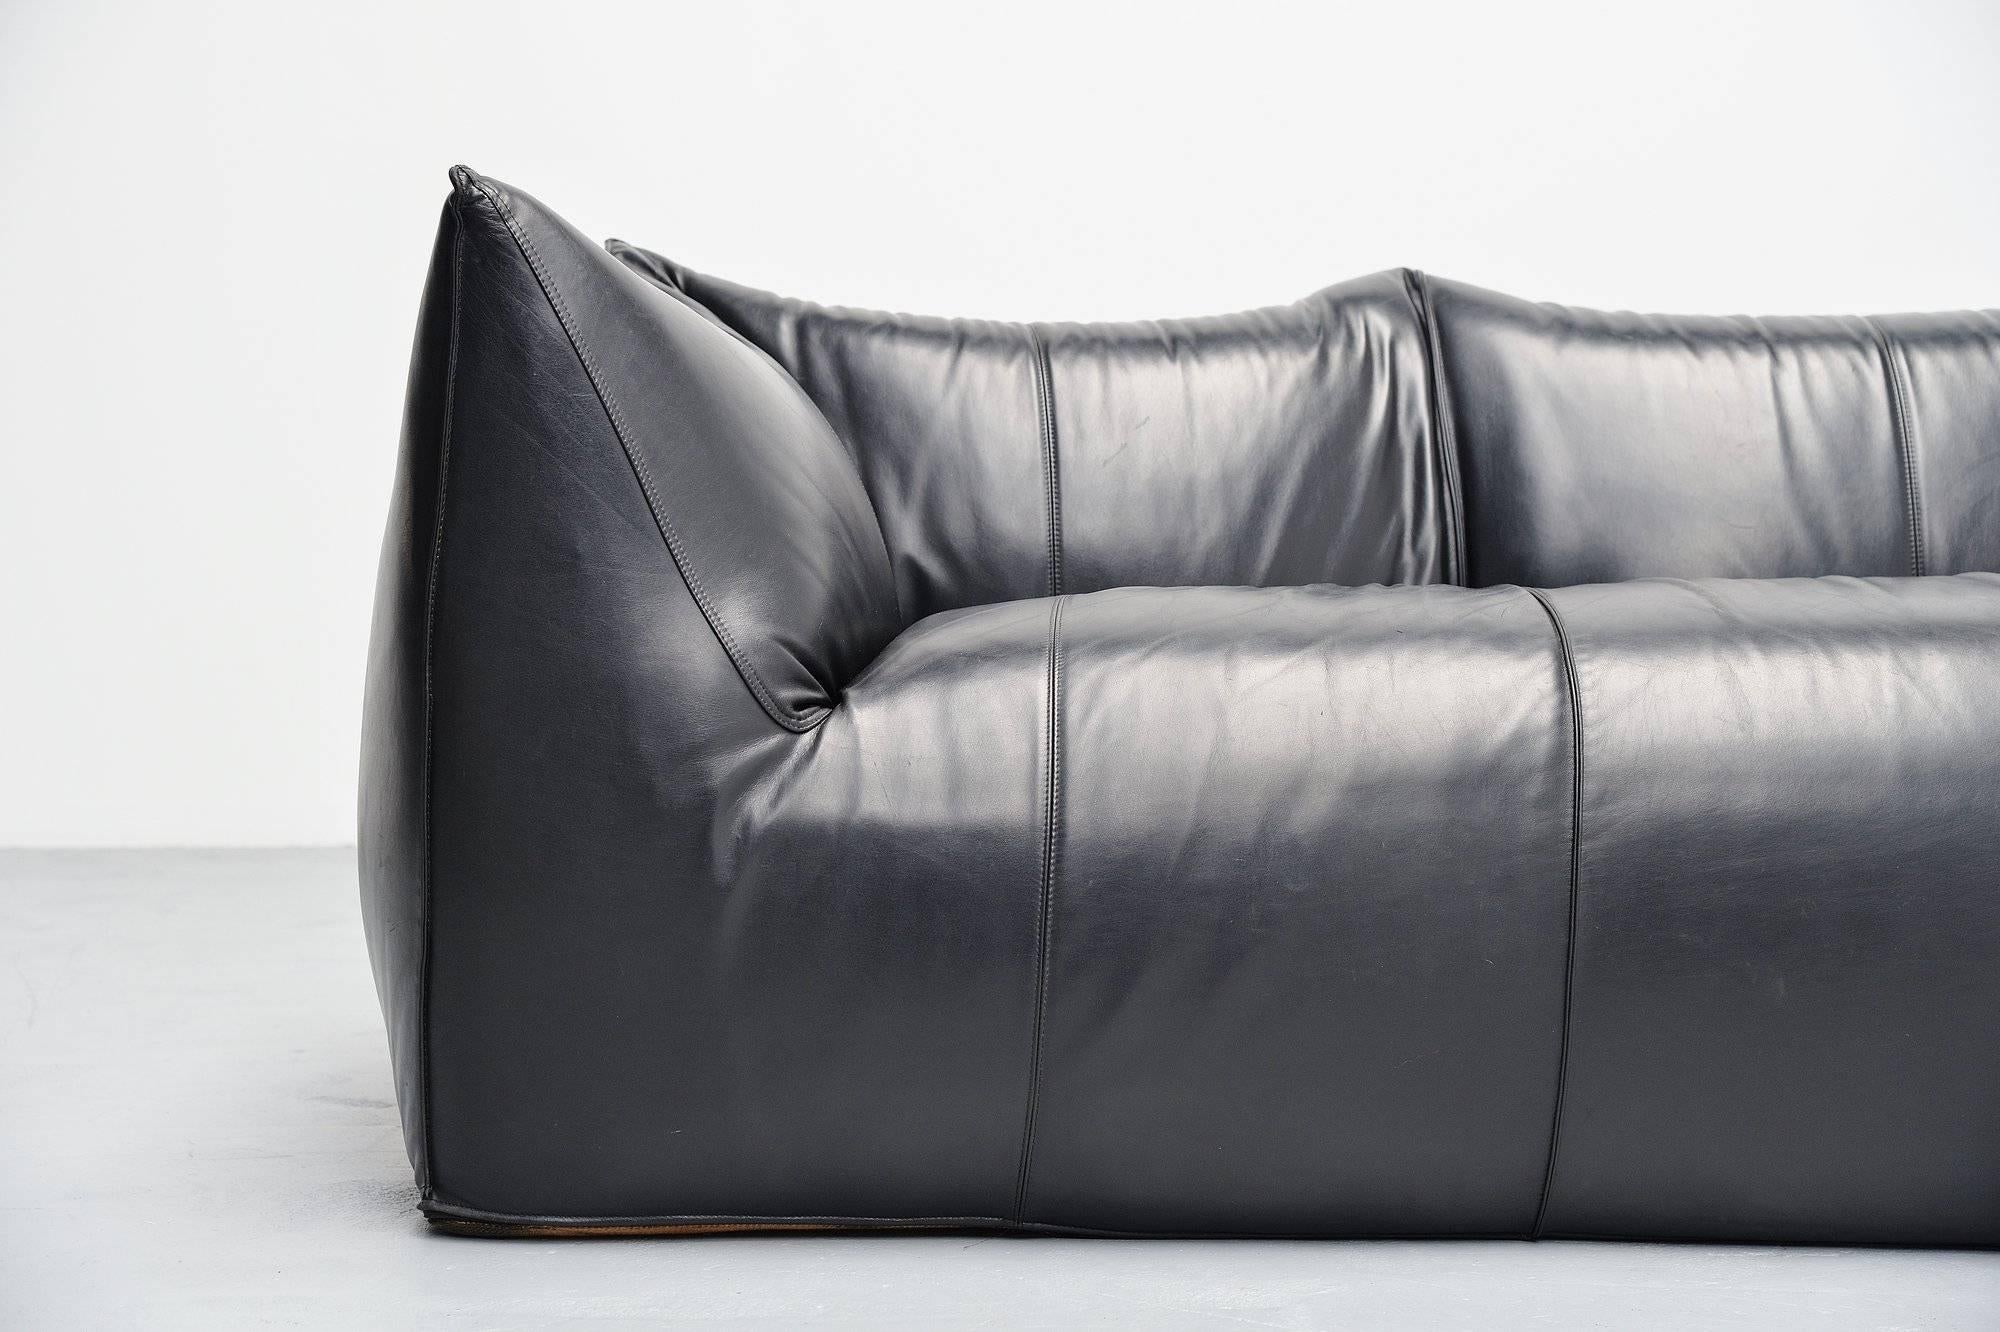 Amazing quality and comfortable three-seat 'Bambole' sofa, designed by Mario Bellini for B&B Italia in 1972. Very nice and high quality usable large sofa. Very nice shaped sofa made of high quality black buffalo leather. This black leather sofa has